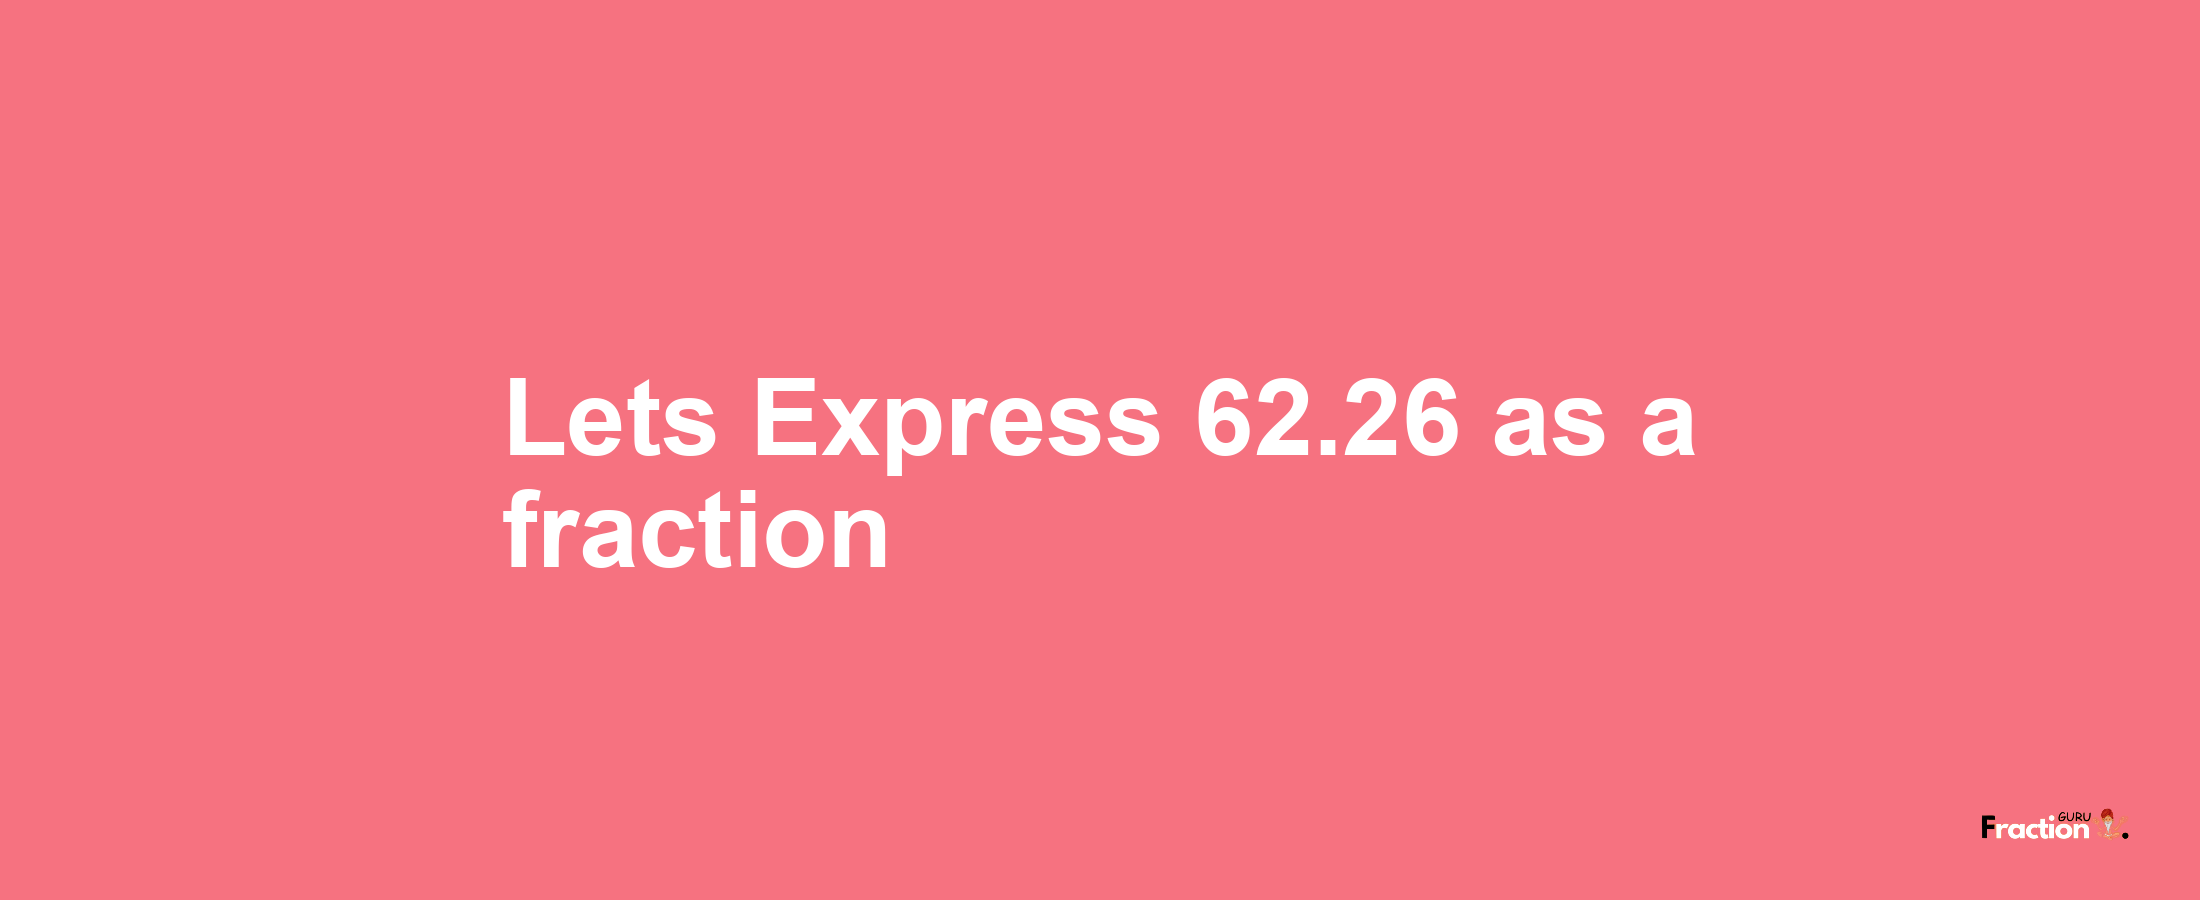 Lets Express 62.26 as afraction